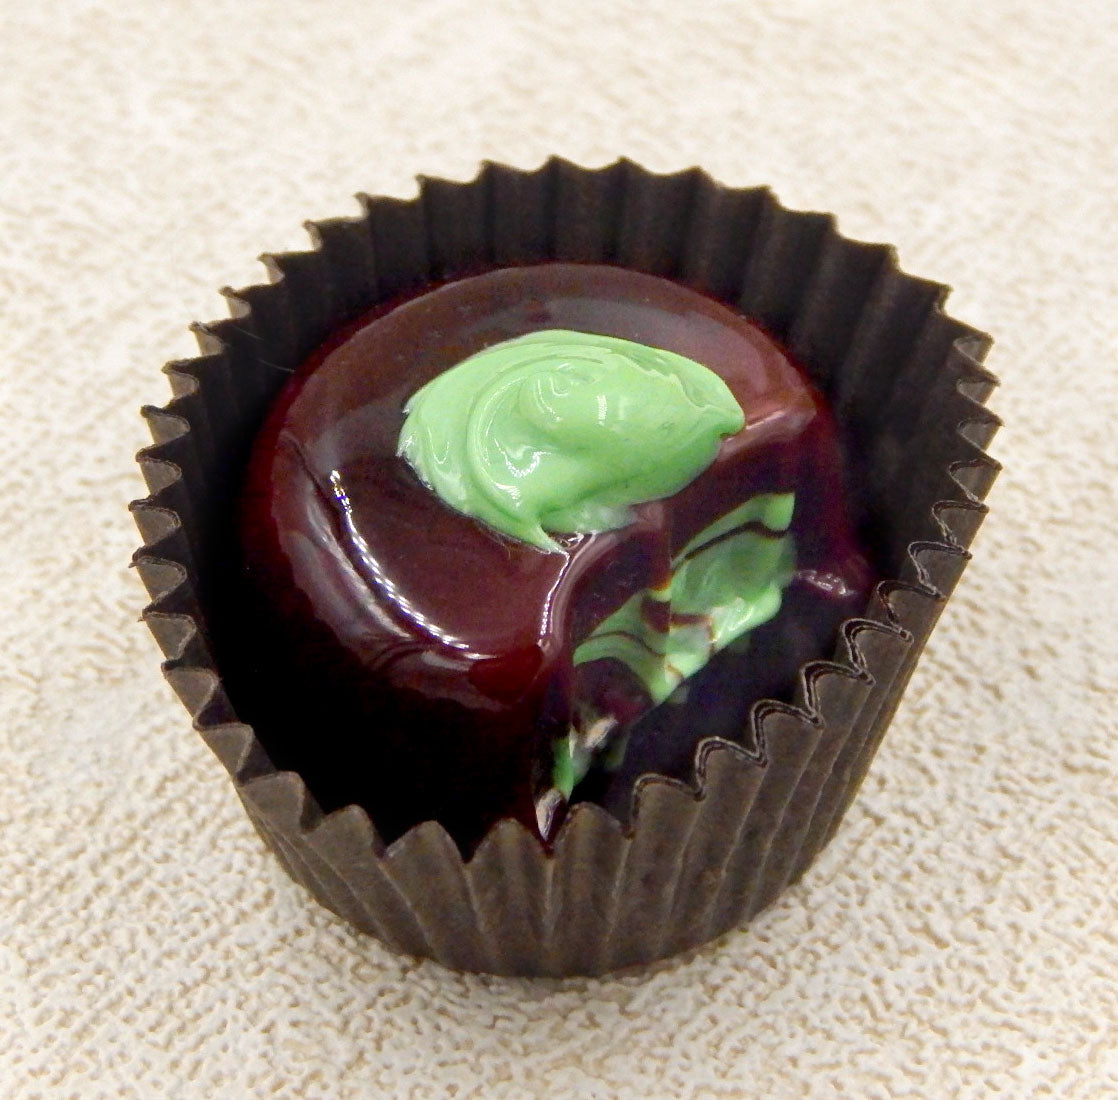 Bitten Chocolate with Mint Dollop & Chocolate with Mint Filling (B11-081CMMX)